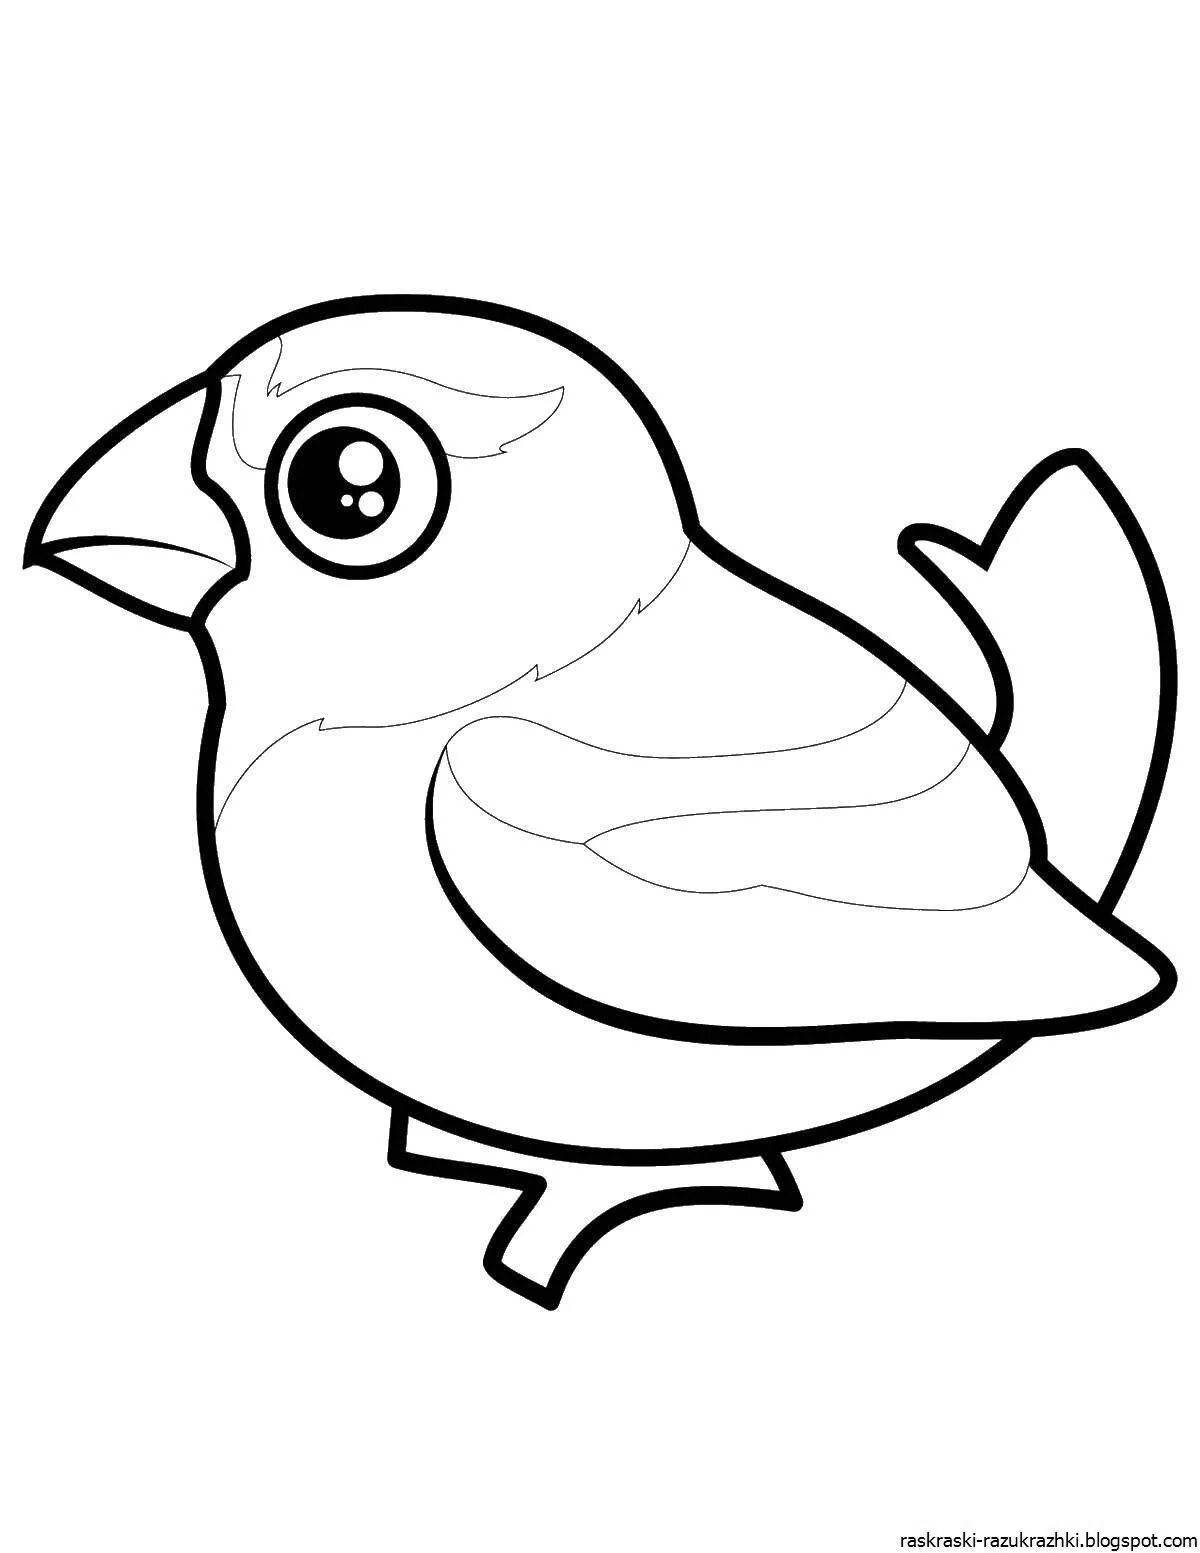 Coloring book cheerful sparrow for children 3-4 years old